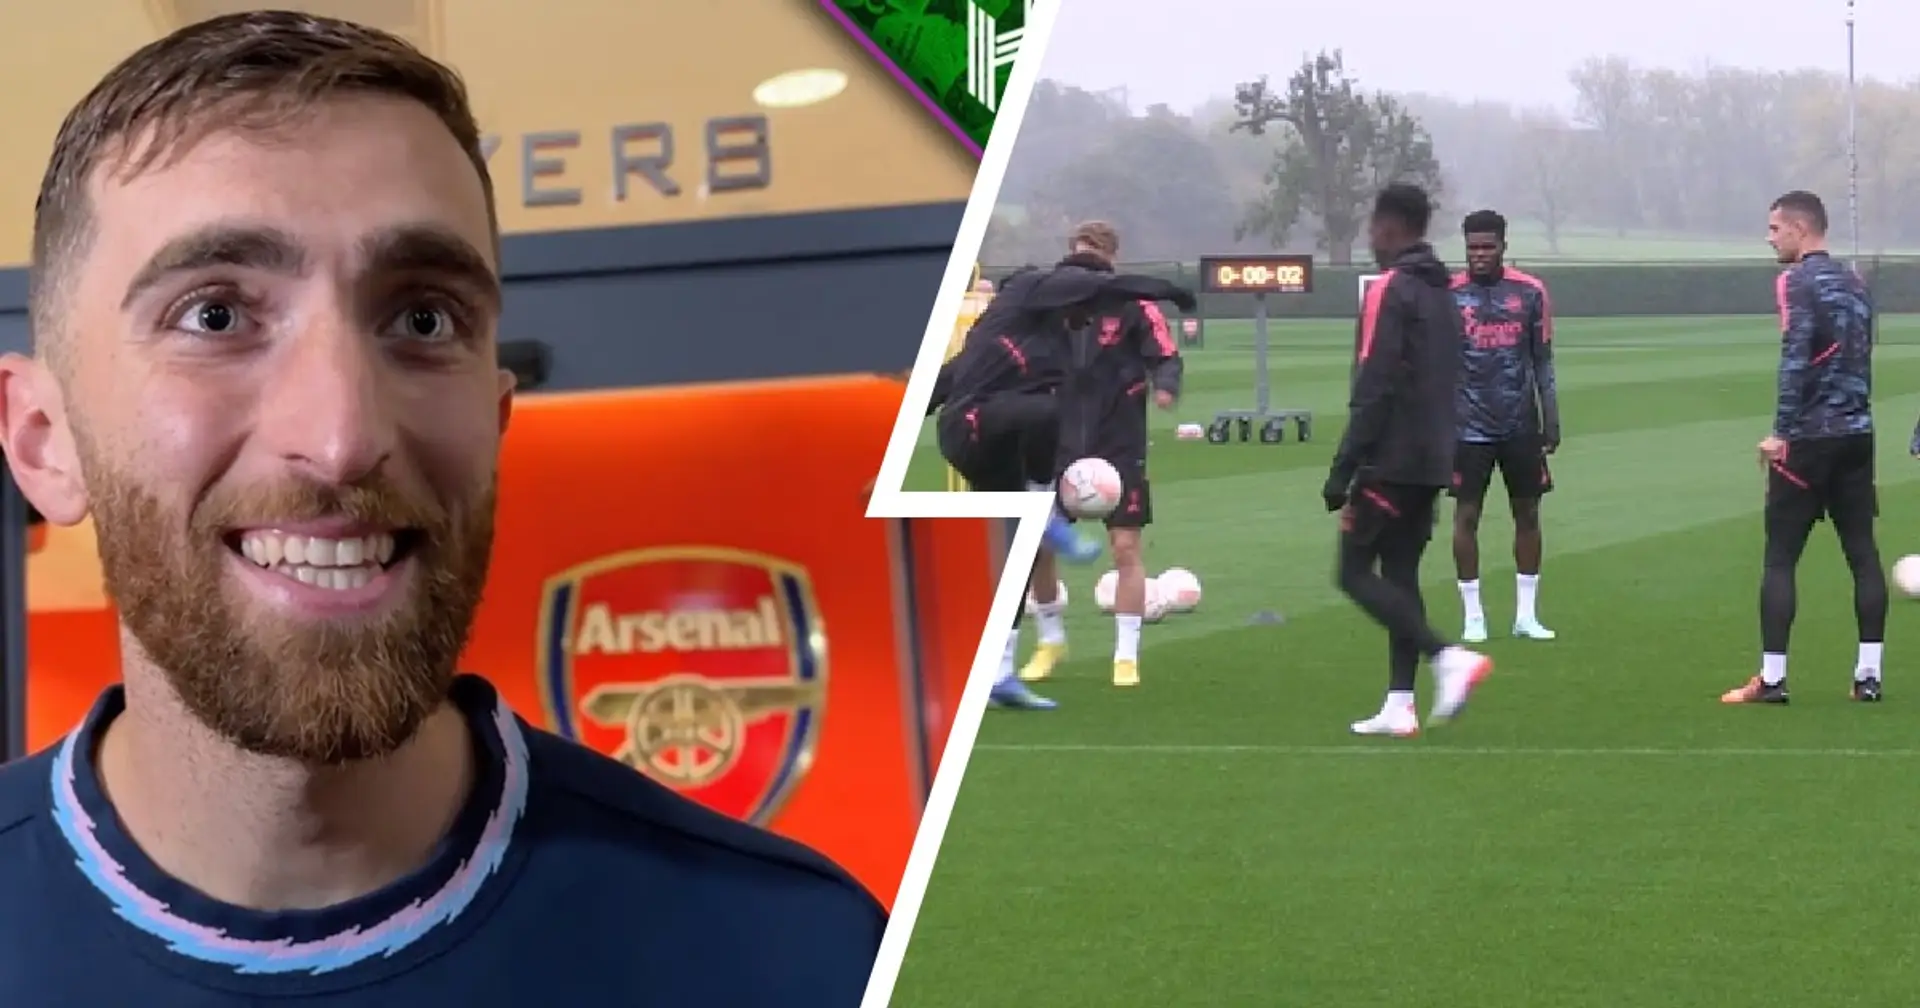 Matt Turner says potential arrival of 'talented' player will give Arsenal 'fiery edge' 